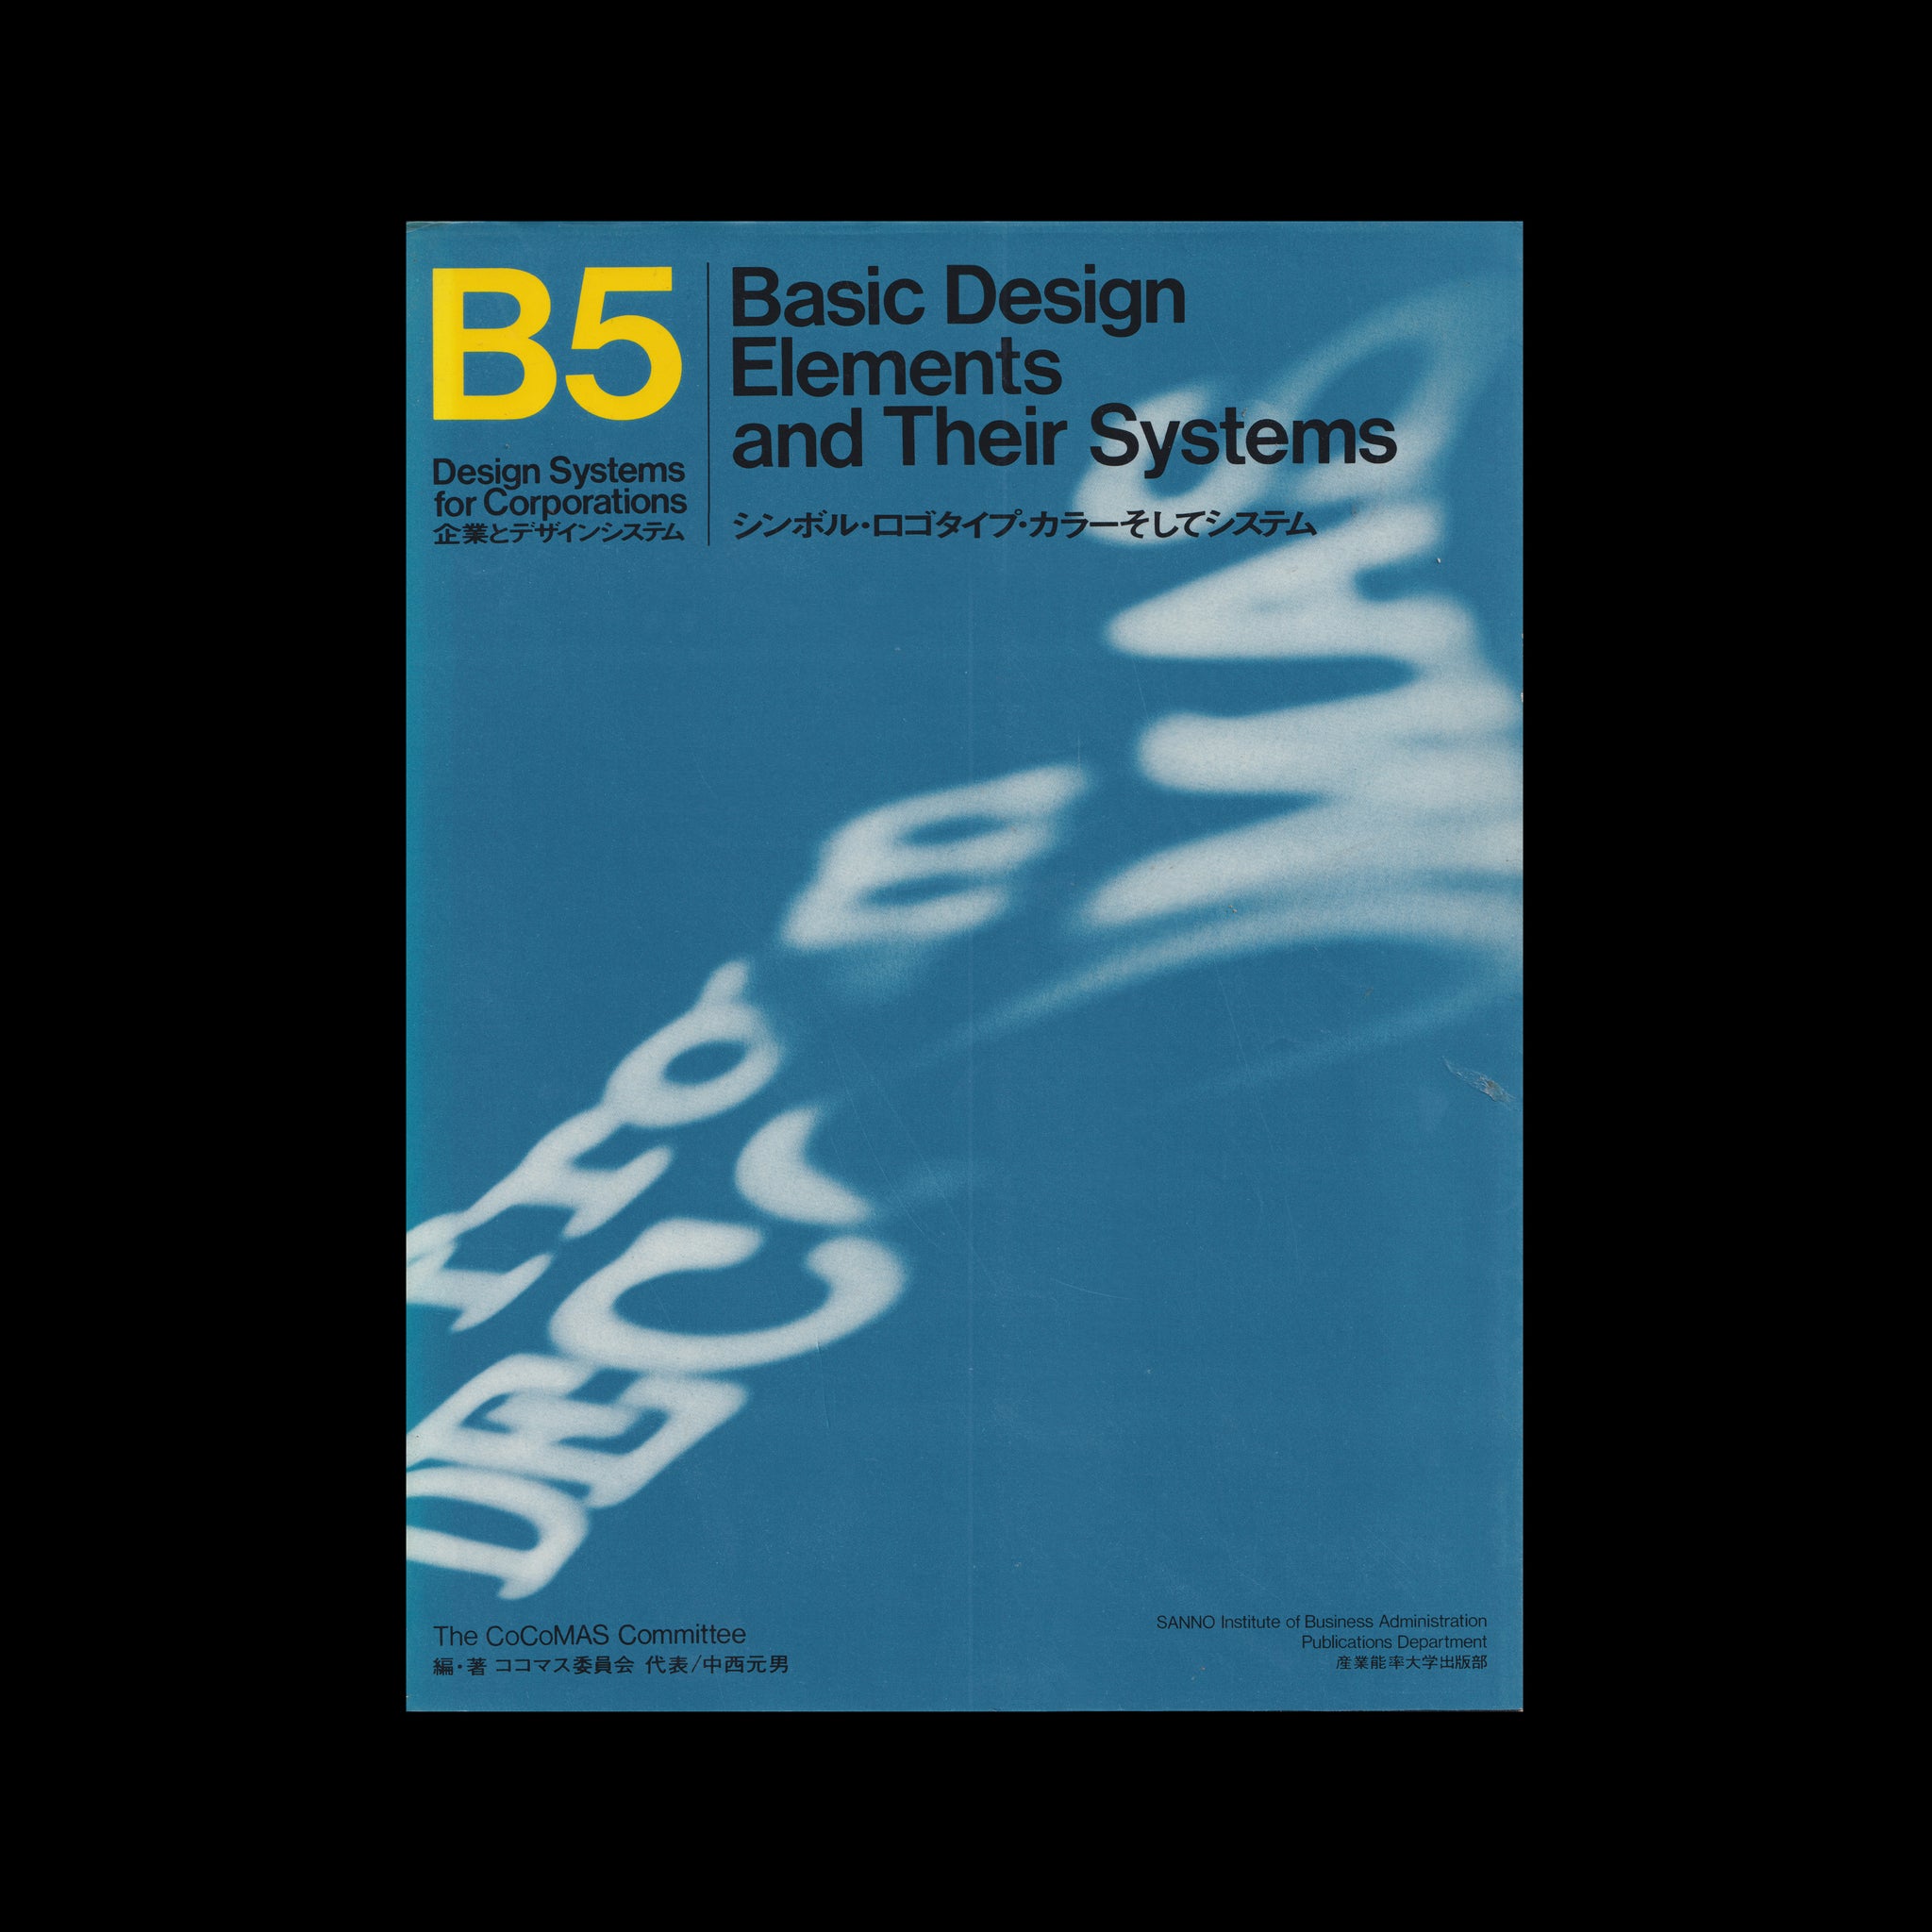 B5 Basic Design Elements and their Systems, 1979